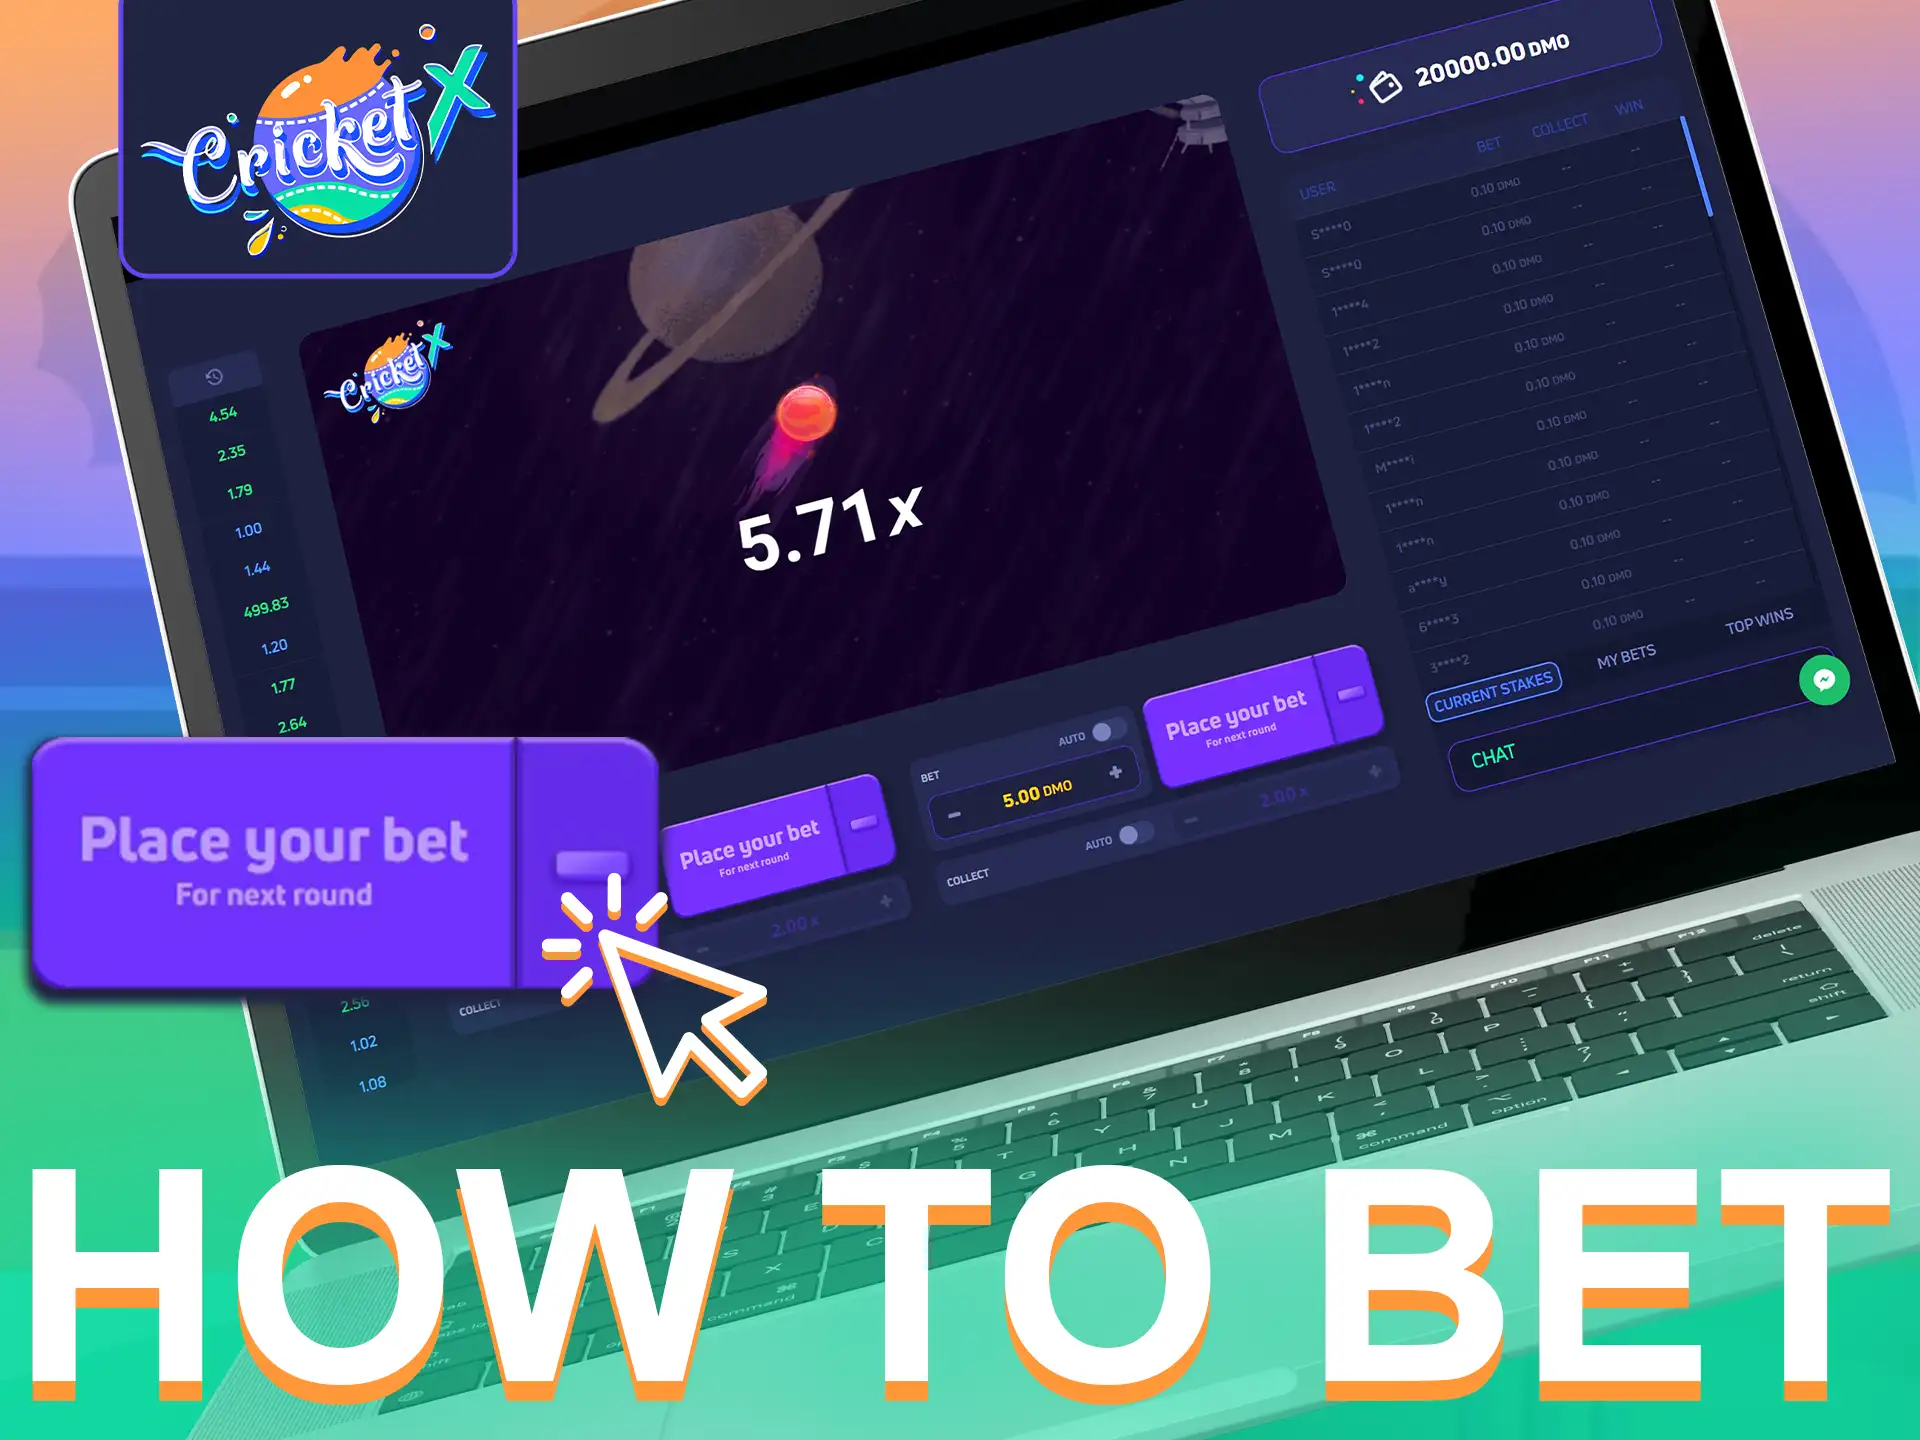 Find out how to bet at CricketX.